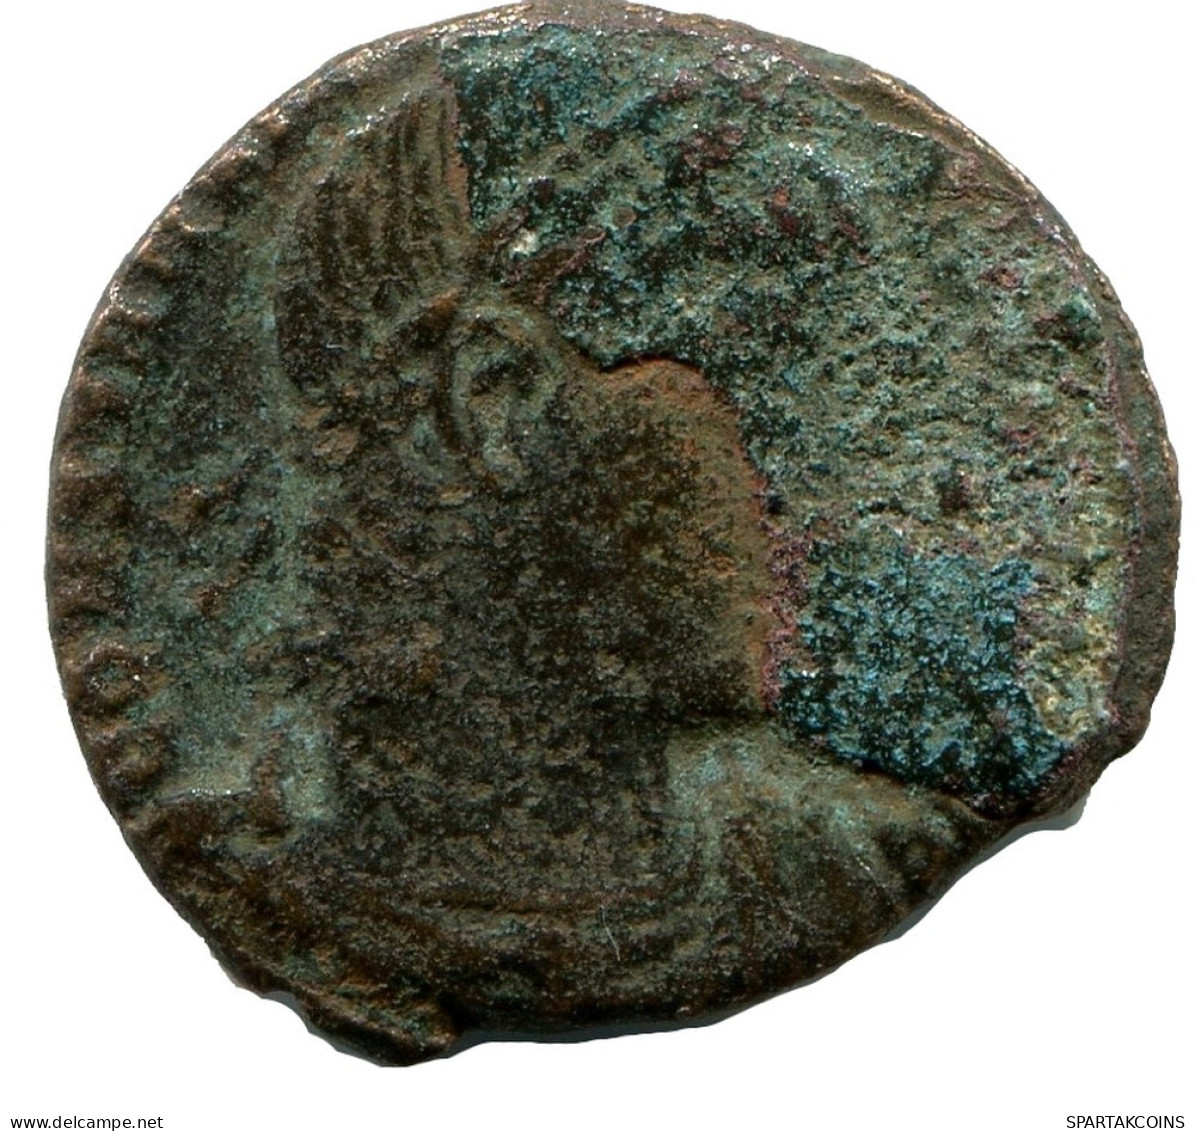 CONSTANTINE I MINTED IN CONSTANTINOPLE FOUND IN IHNASYAH HOARD #ANC10757.14.D.A - The Christian Empire (307 AD Tot 363 AD)